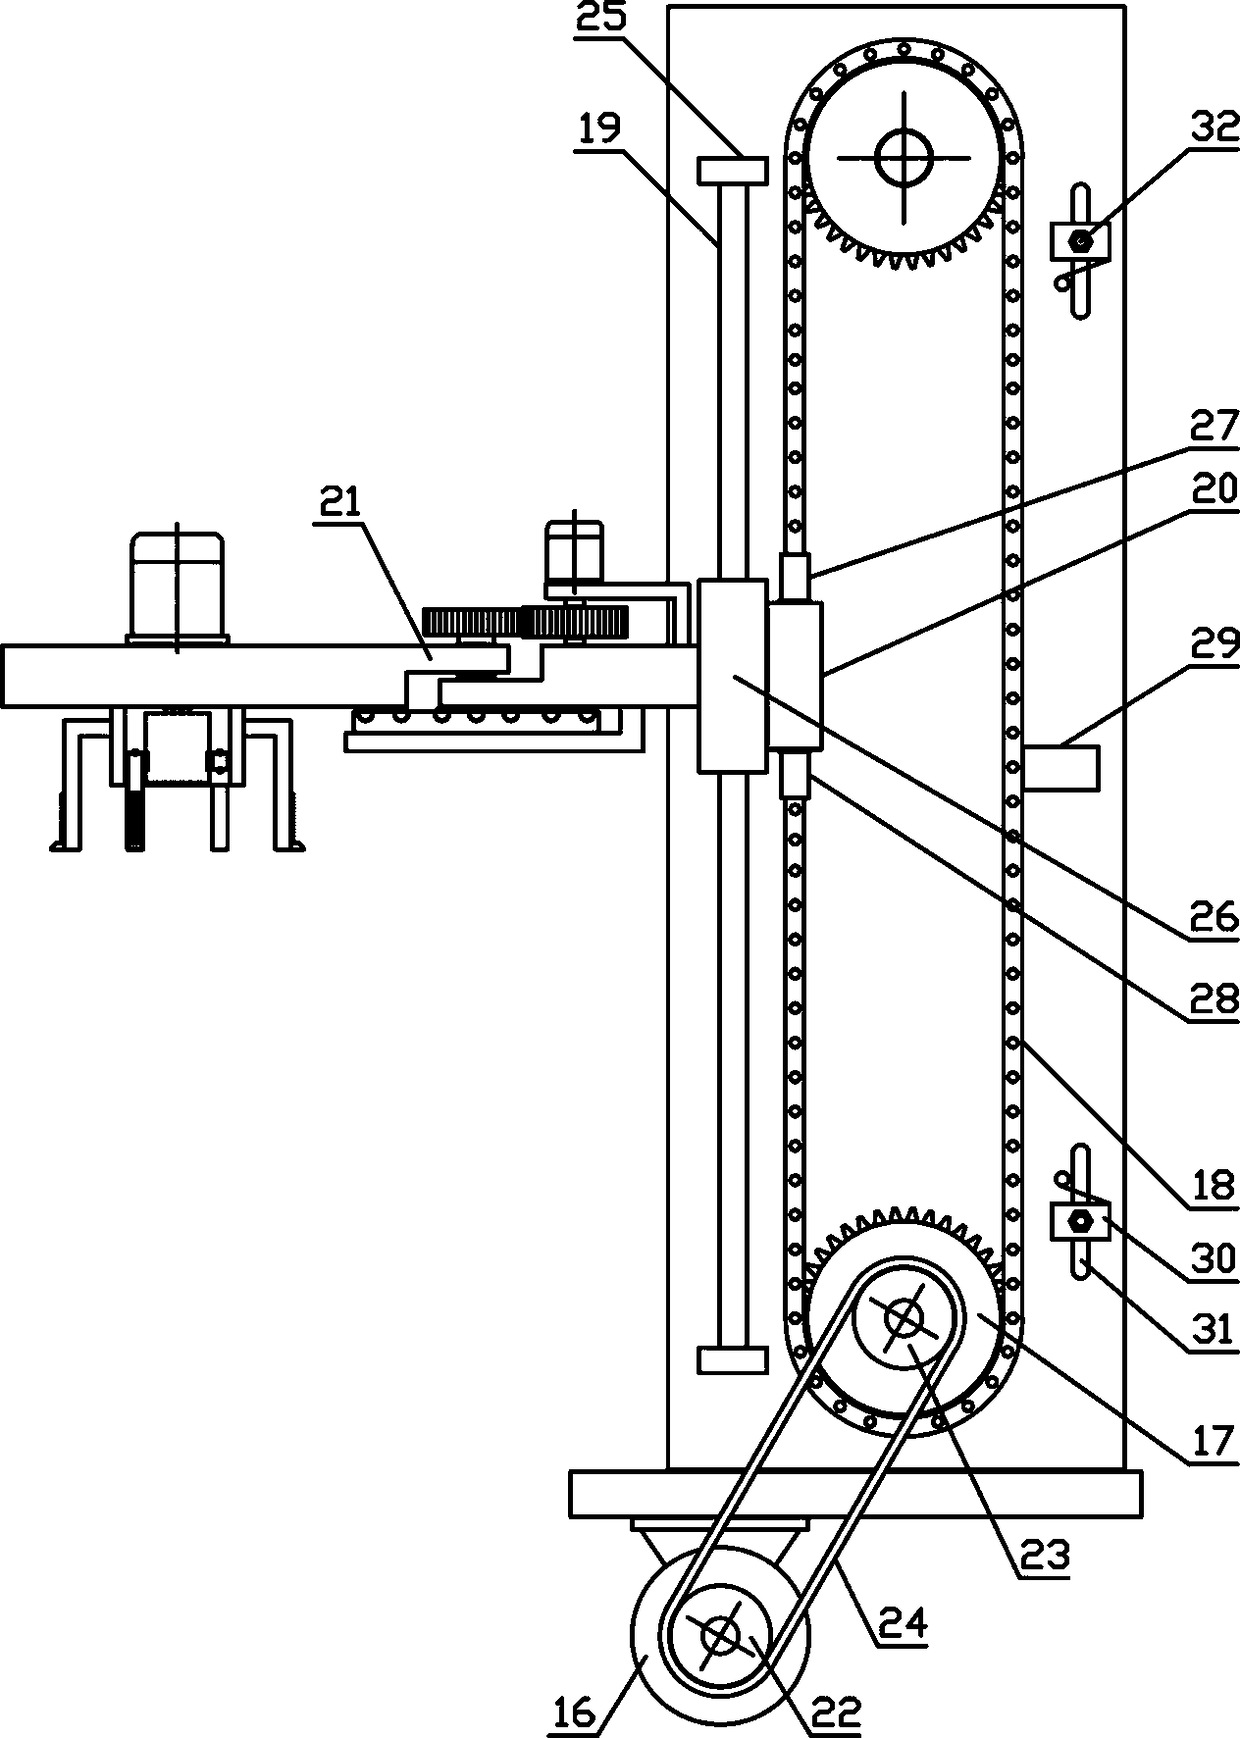 Shaft sleeve continuous vertical lifting mechanism